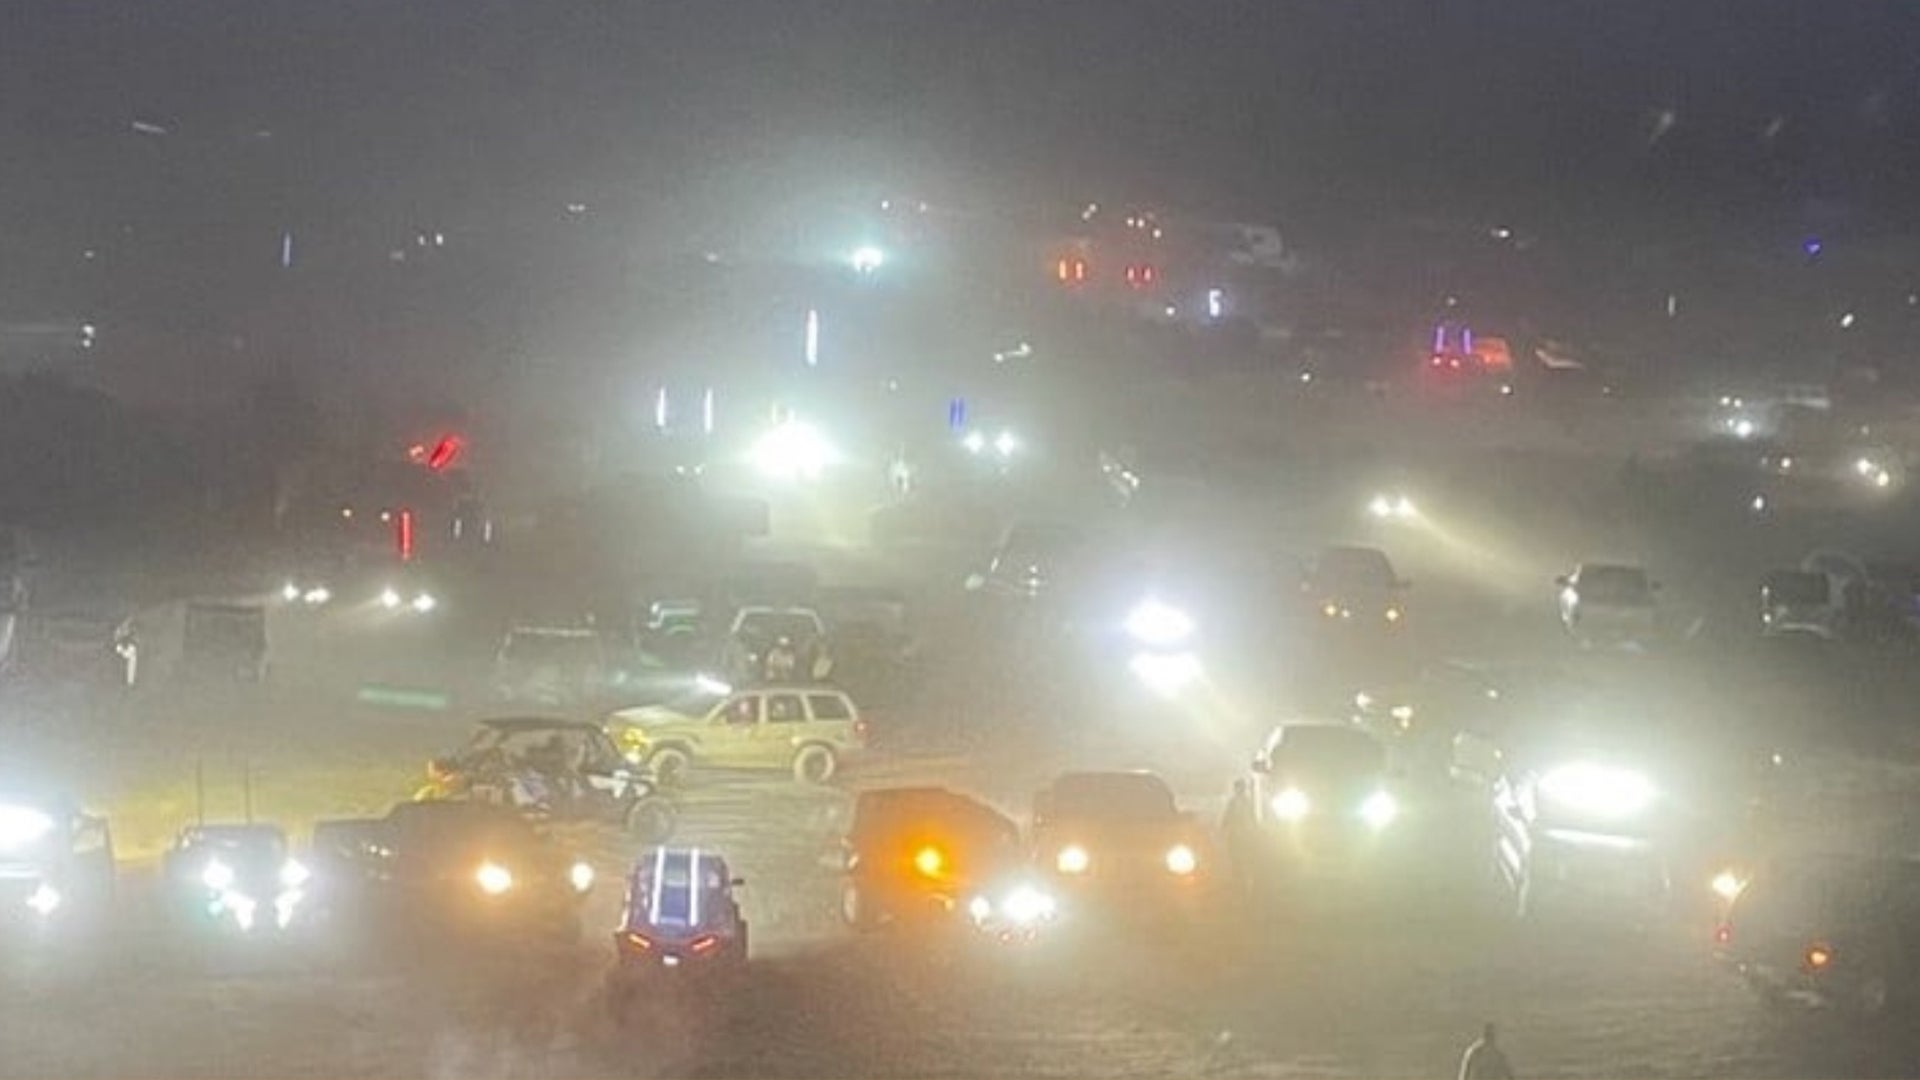 Pirates Off-Road illegal party at night